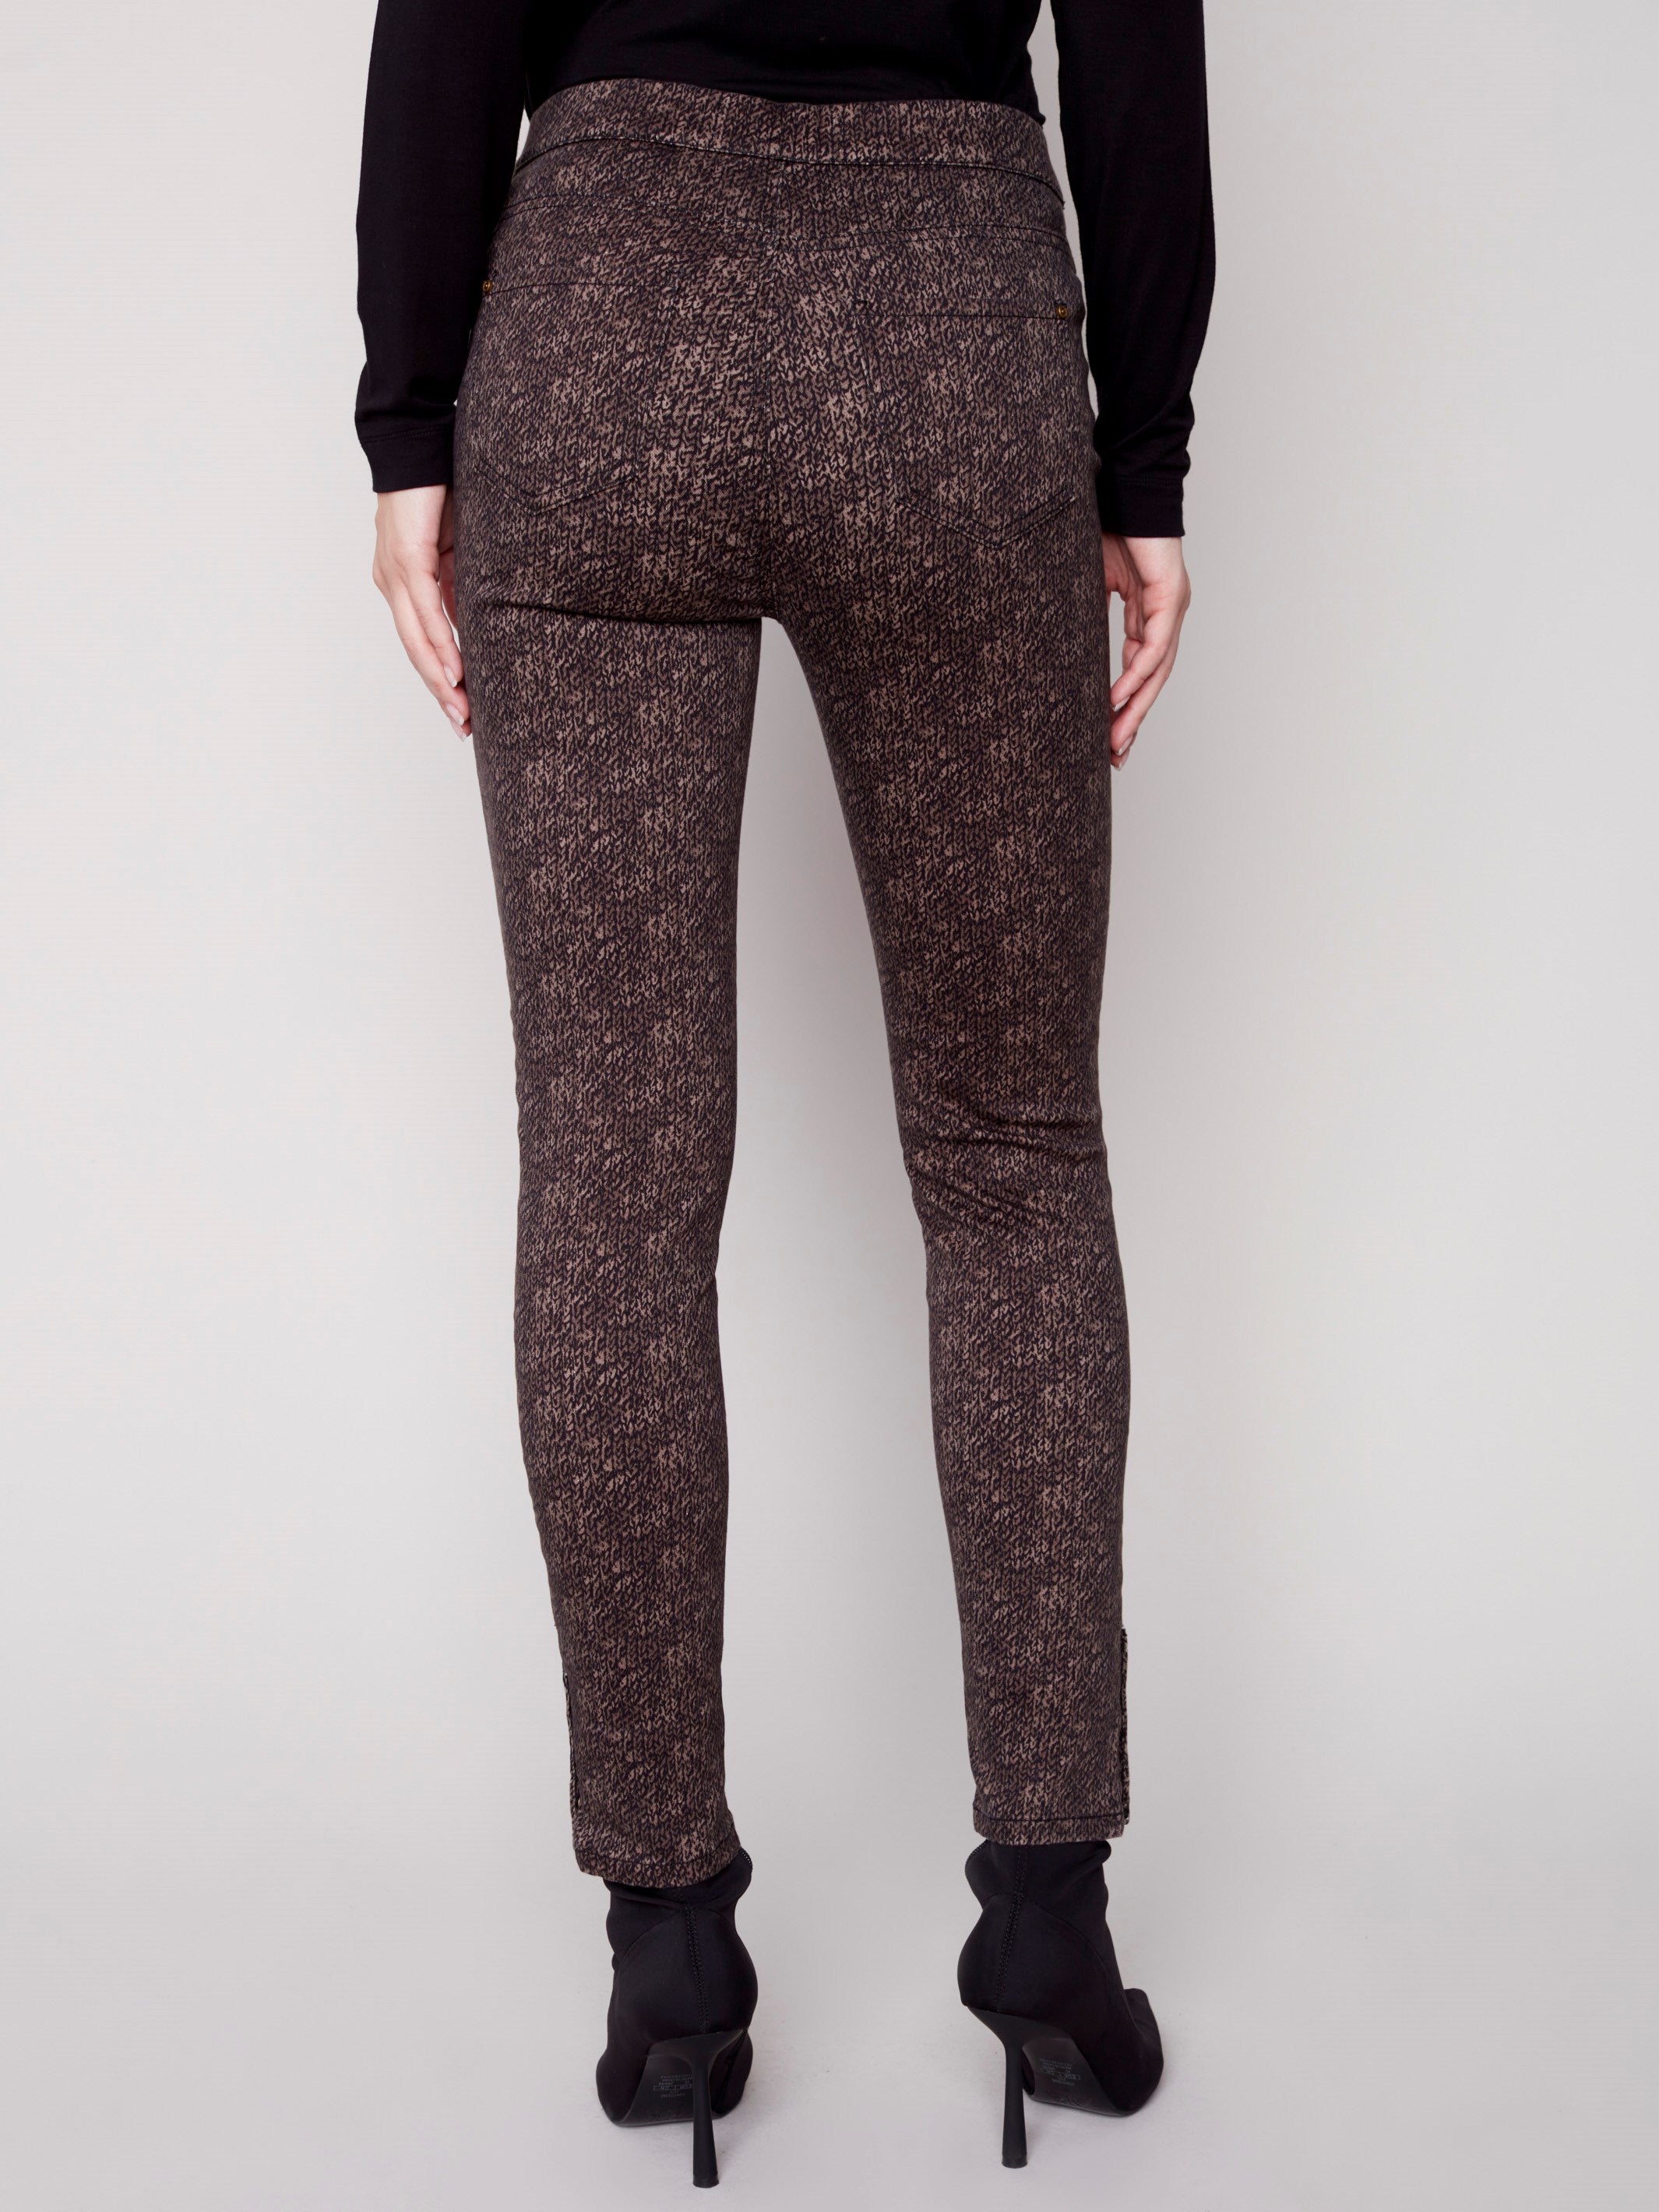 Printed Twill Pants with Snap Button Hem - Truffle